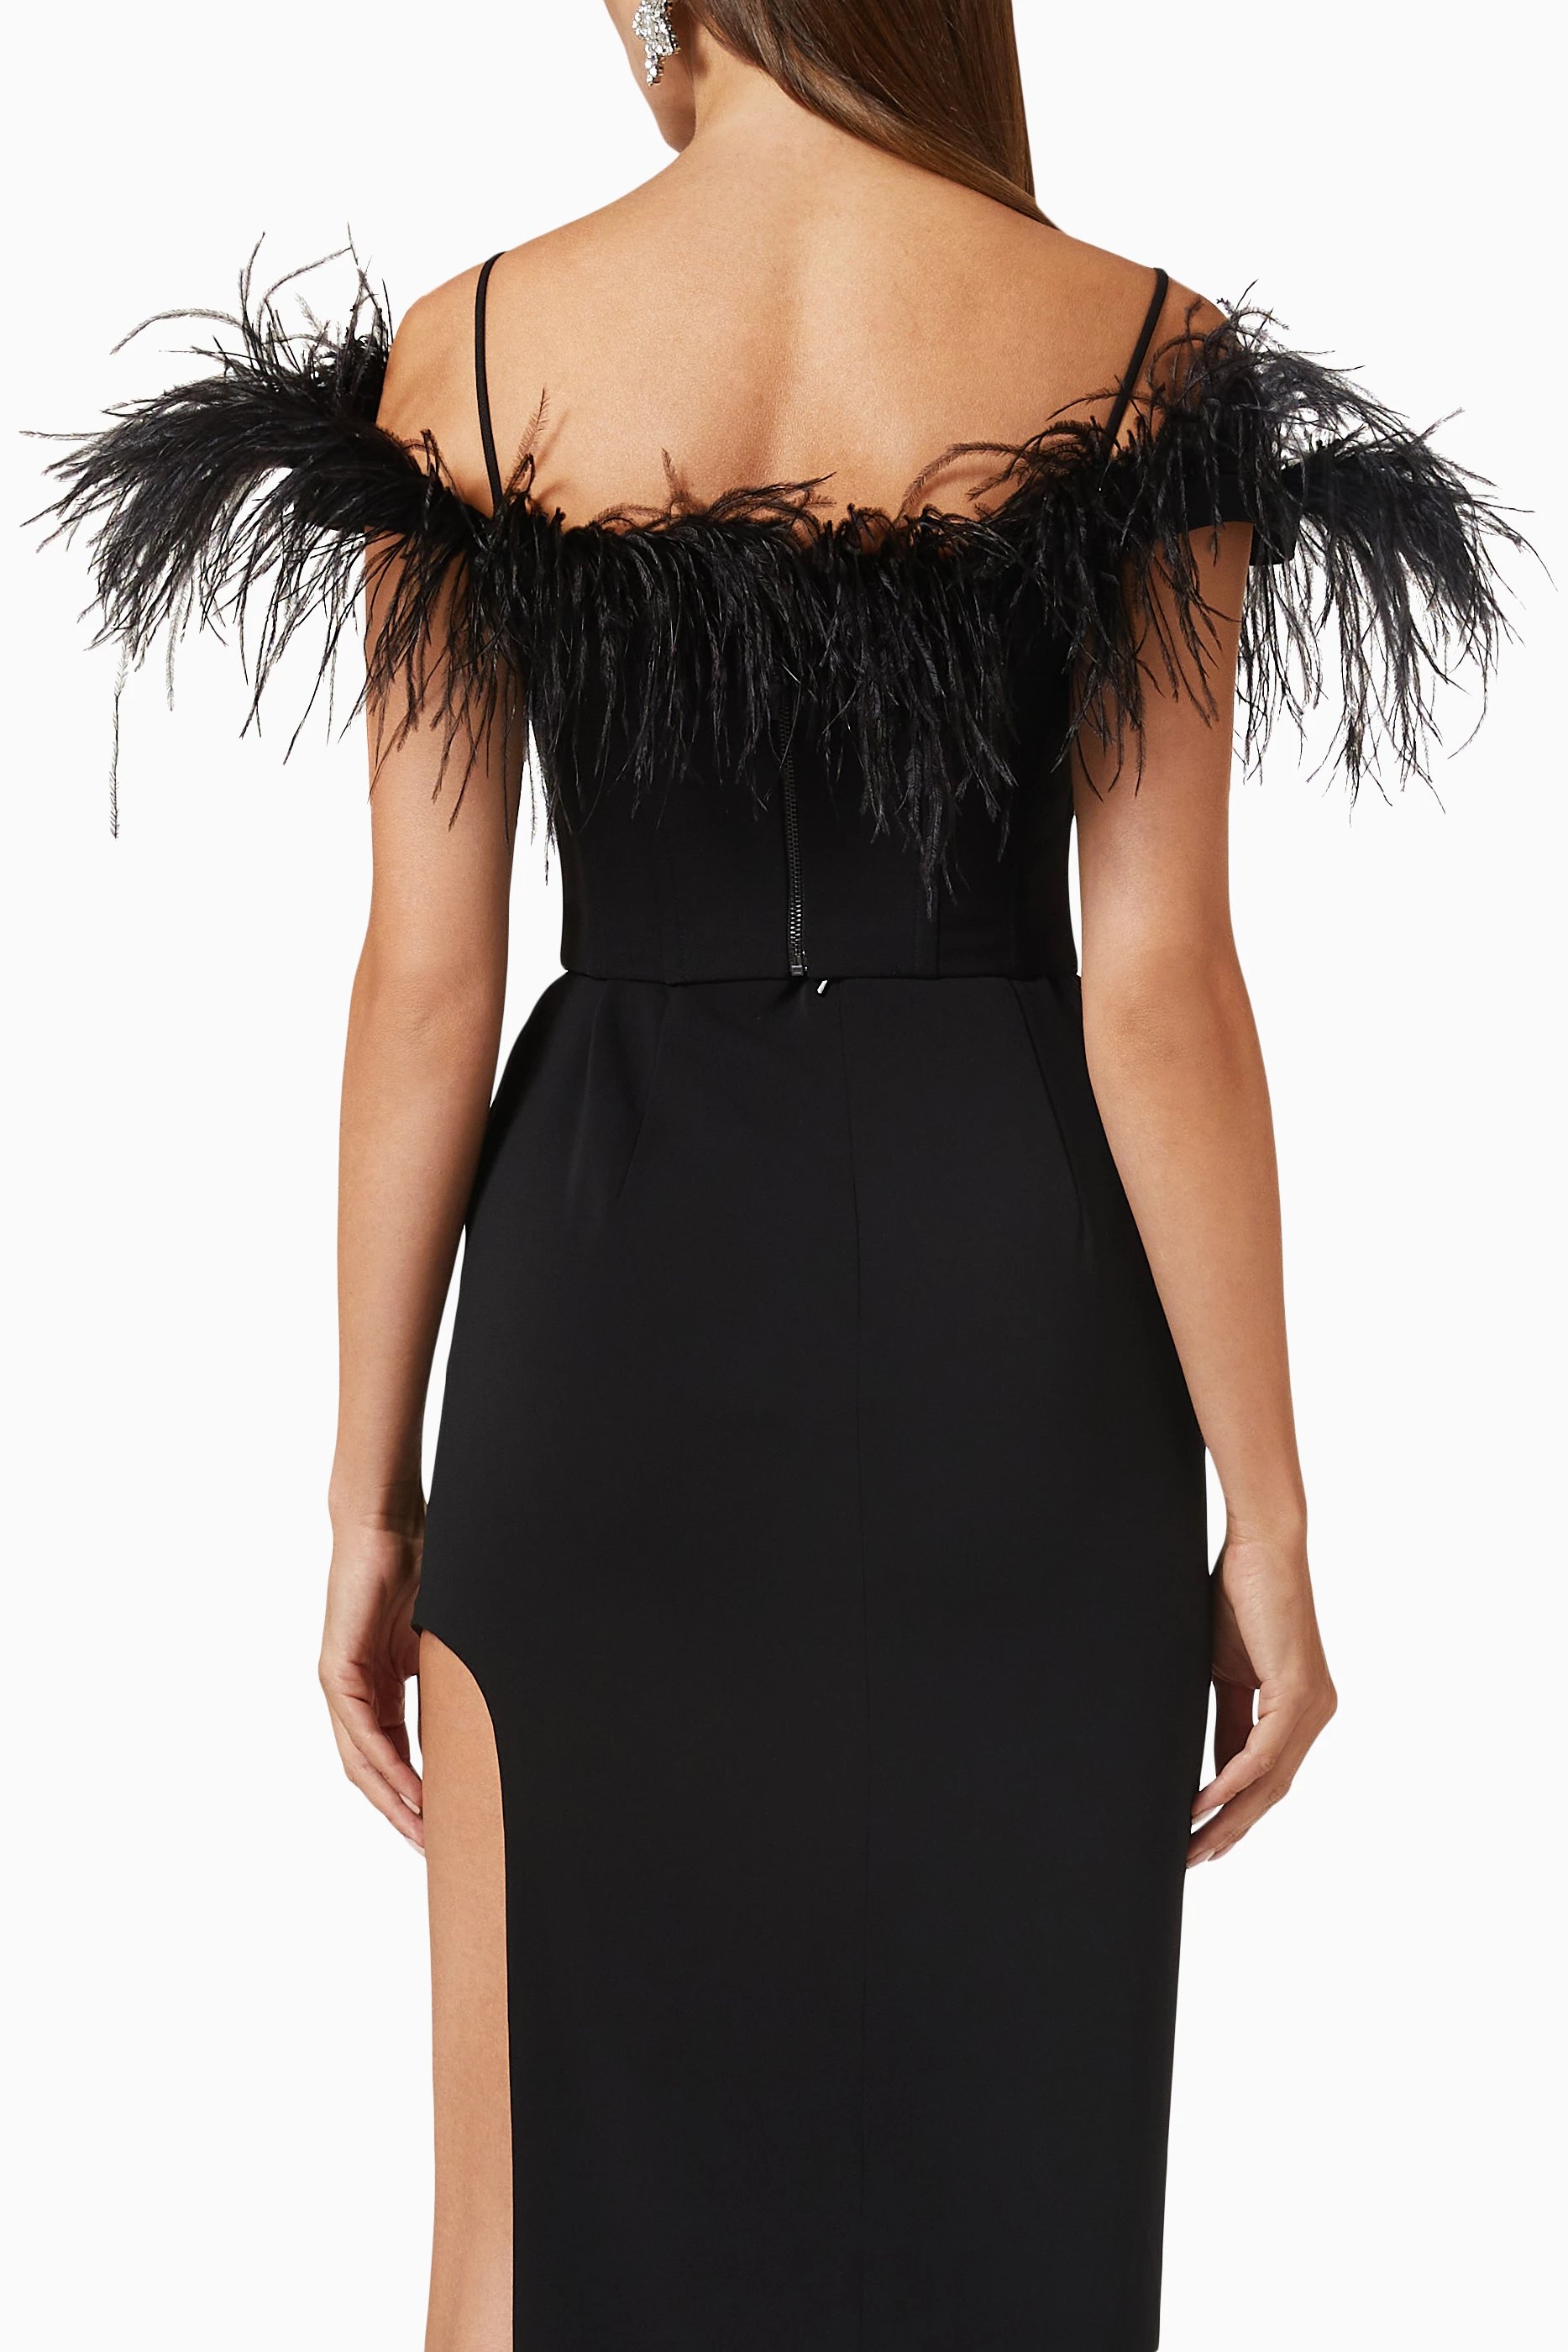 Rozie Corsets Off Shoulder Satin Corset with Feathers